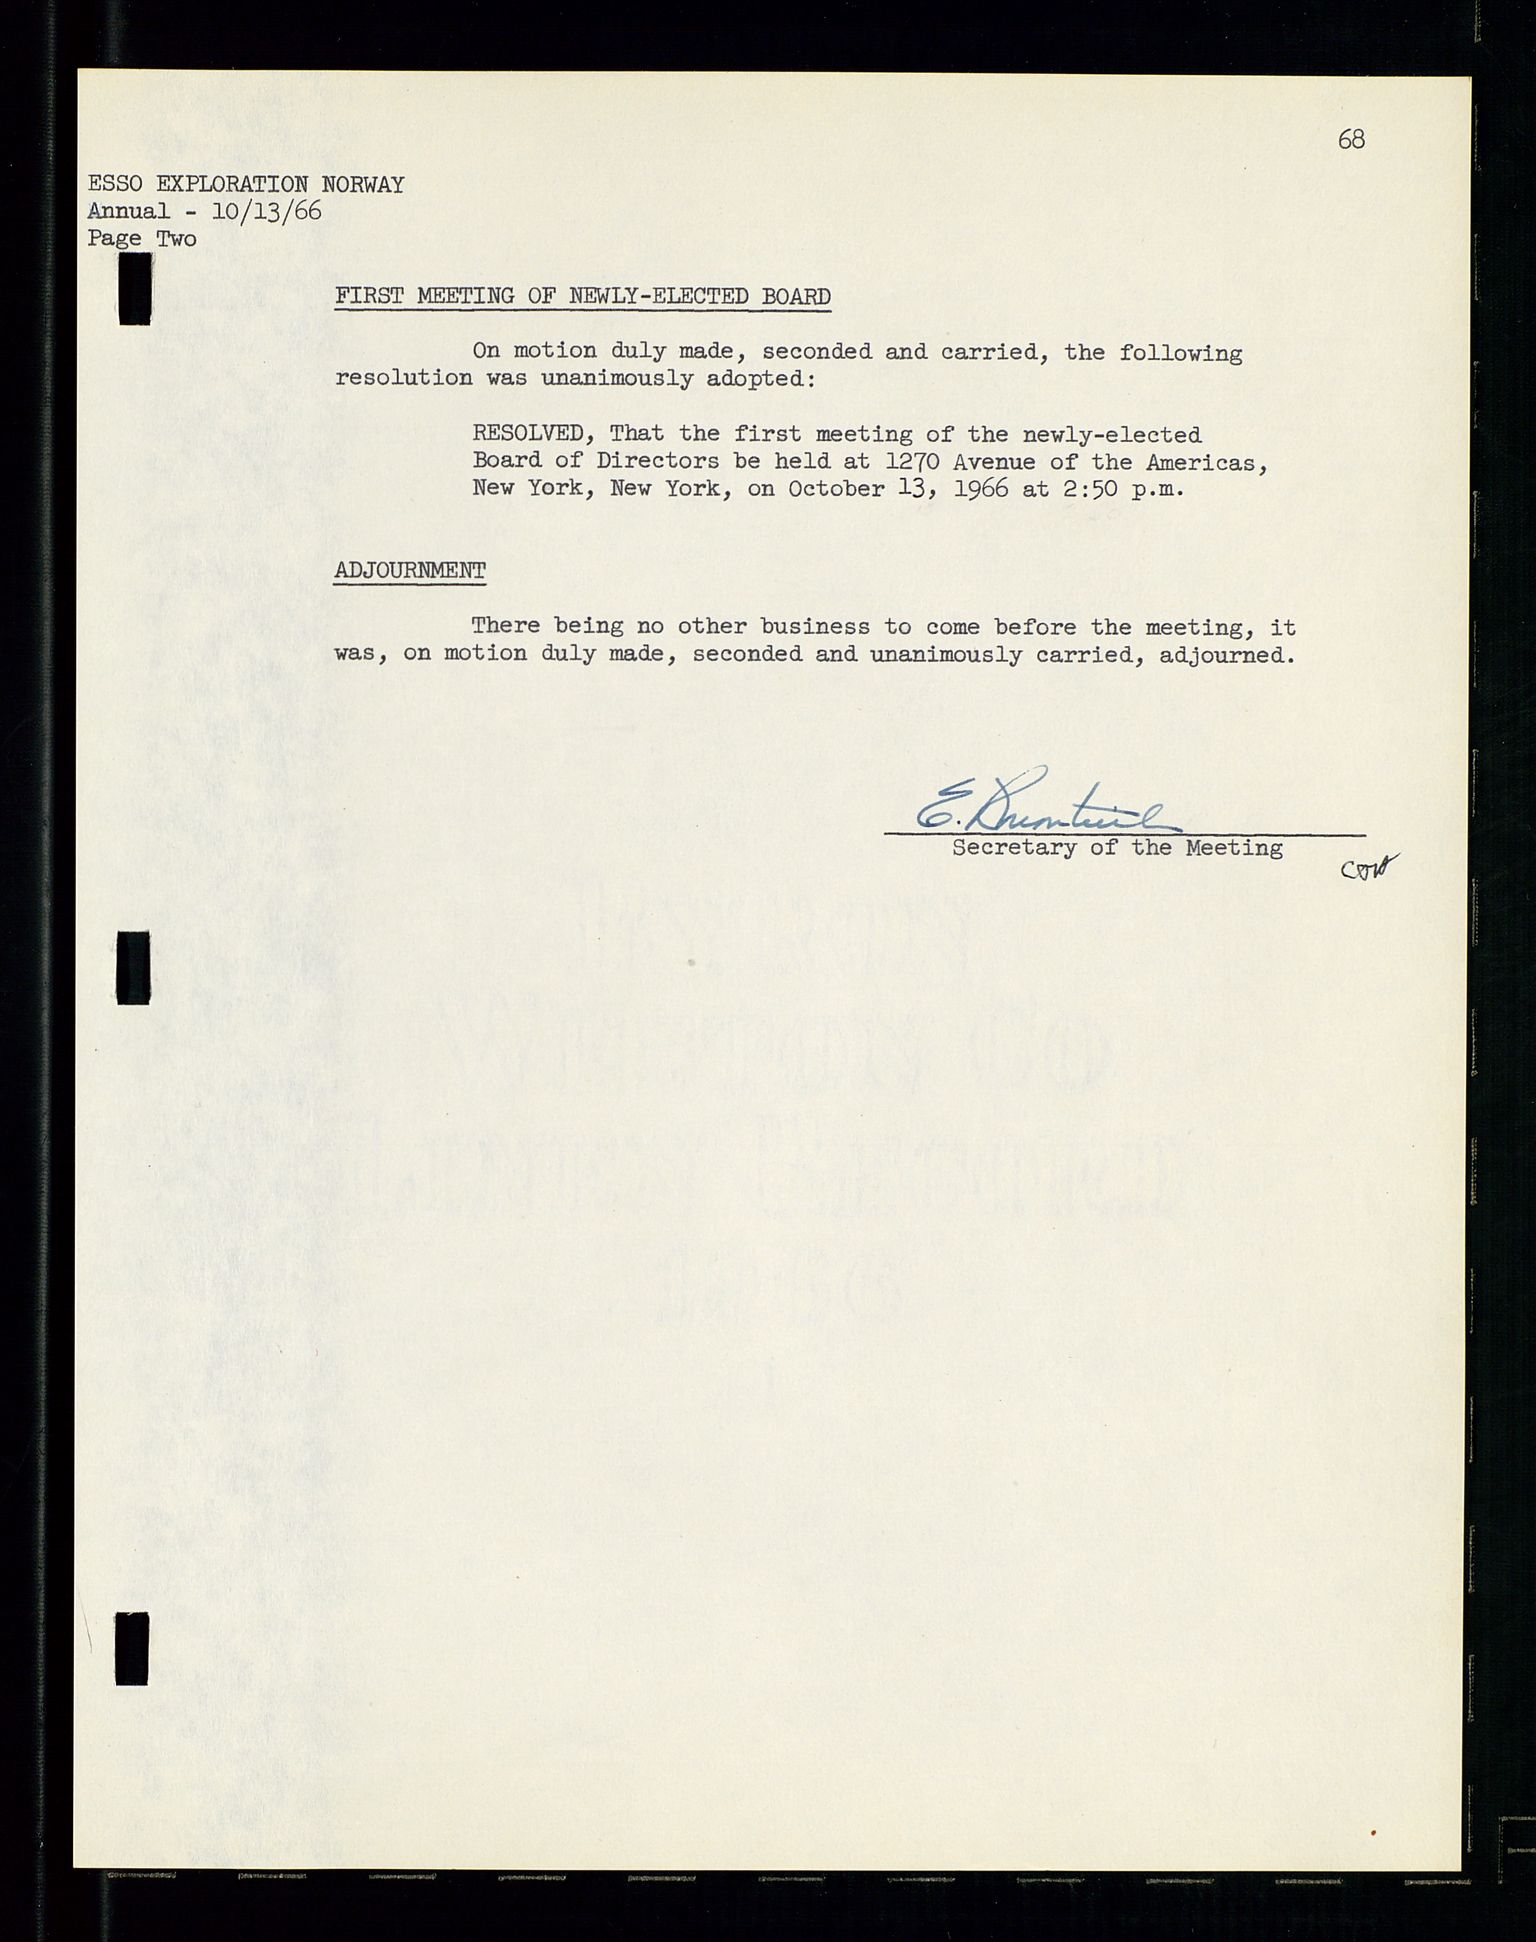 Pa 1512 - Esso Exploration and Production Norway Inc., SAST/A-101917/A/Aa/L0001/0001: Styredokumenter / Corporate records, By-Laws, Board meeting minutes, Incorporations, 1965-1975, p. 68